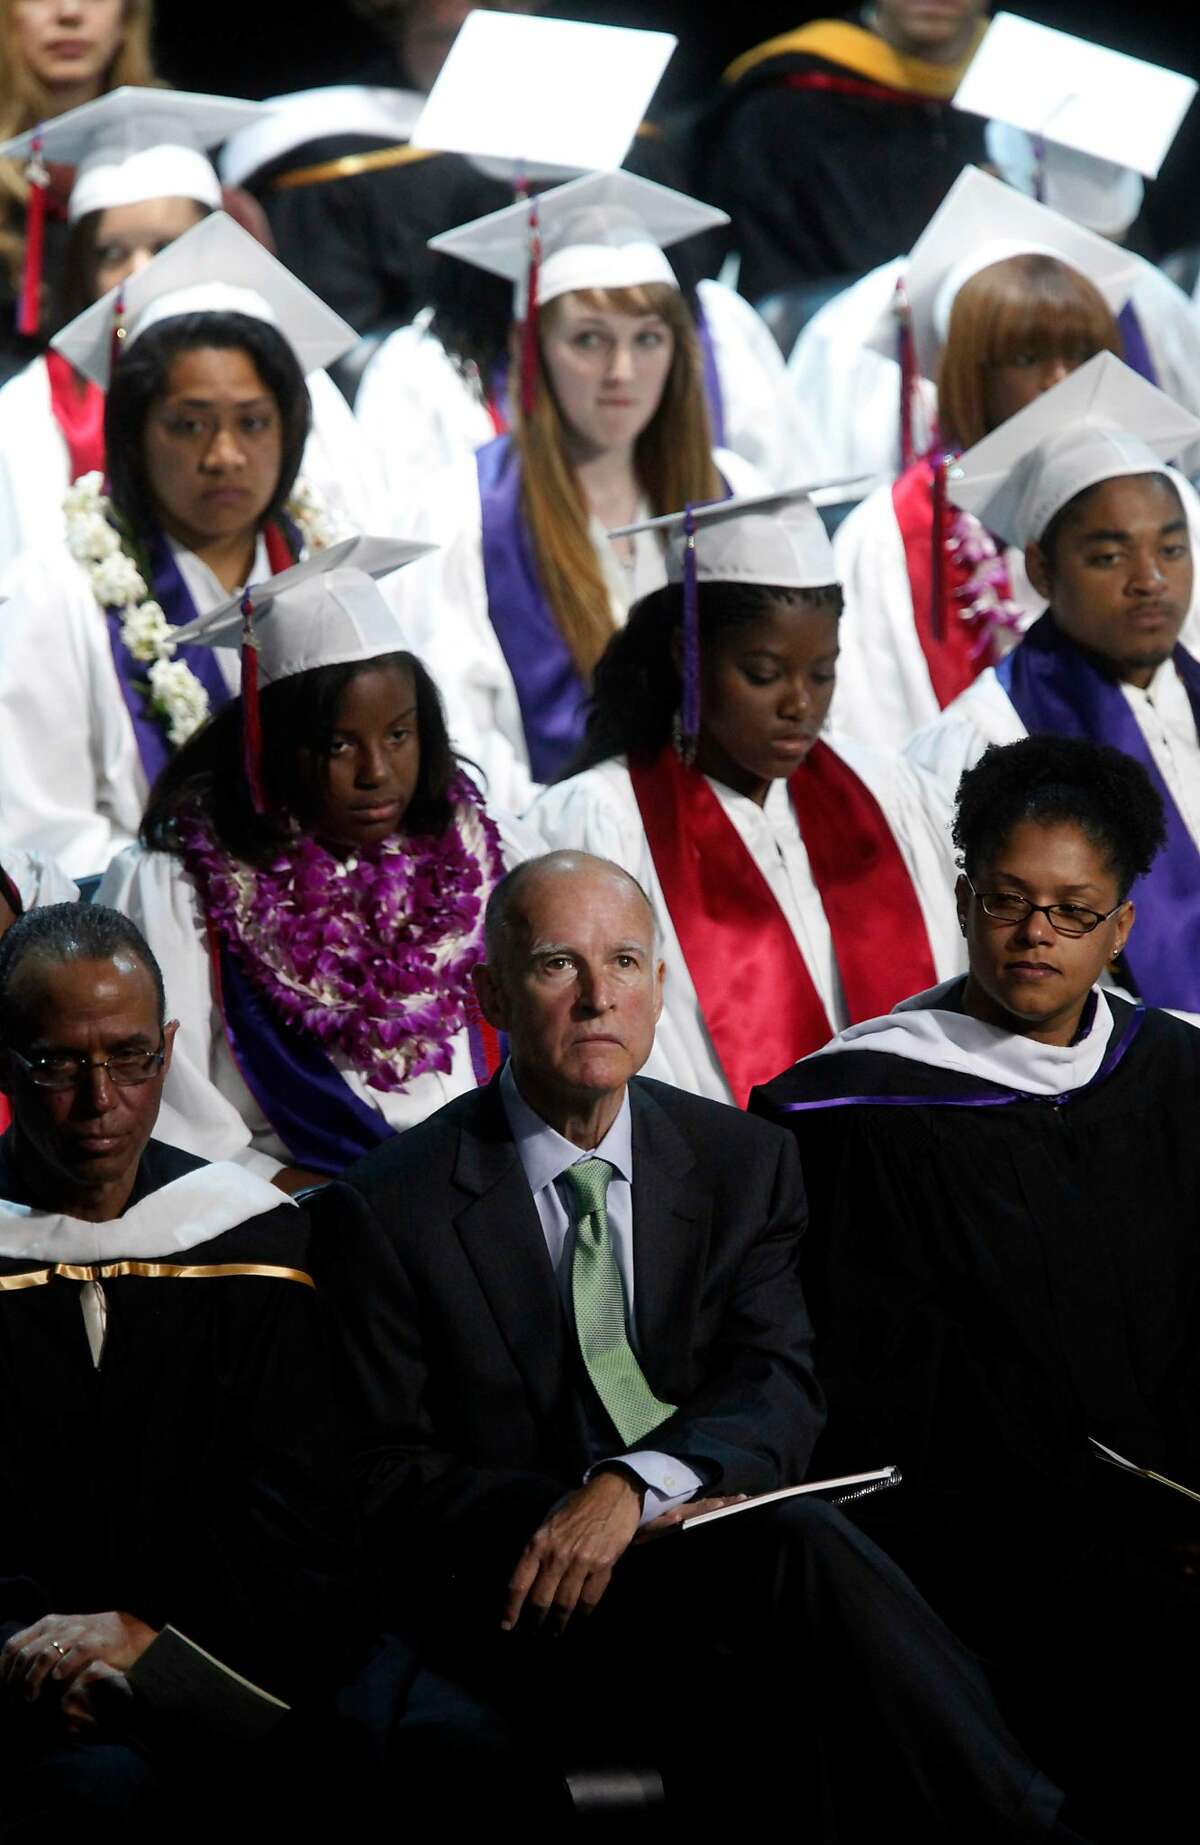 Attorney General and Gubernatorial candidate, Jerry Brown looks up after speaking at the Oakland School for the Arts graduation ceremony on Thursday June 17, 2010 in Oakland, Calif. Brown helped get the charter school off the ground years back is now being blamed by GOP nominee Meg Whitman for the demise of Oakland public schools.